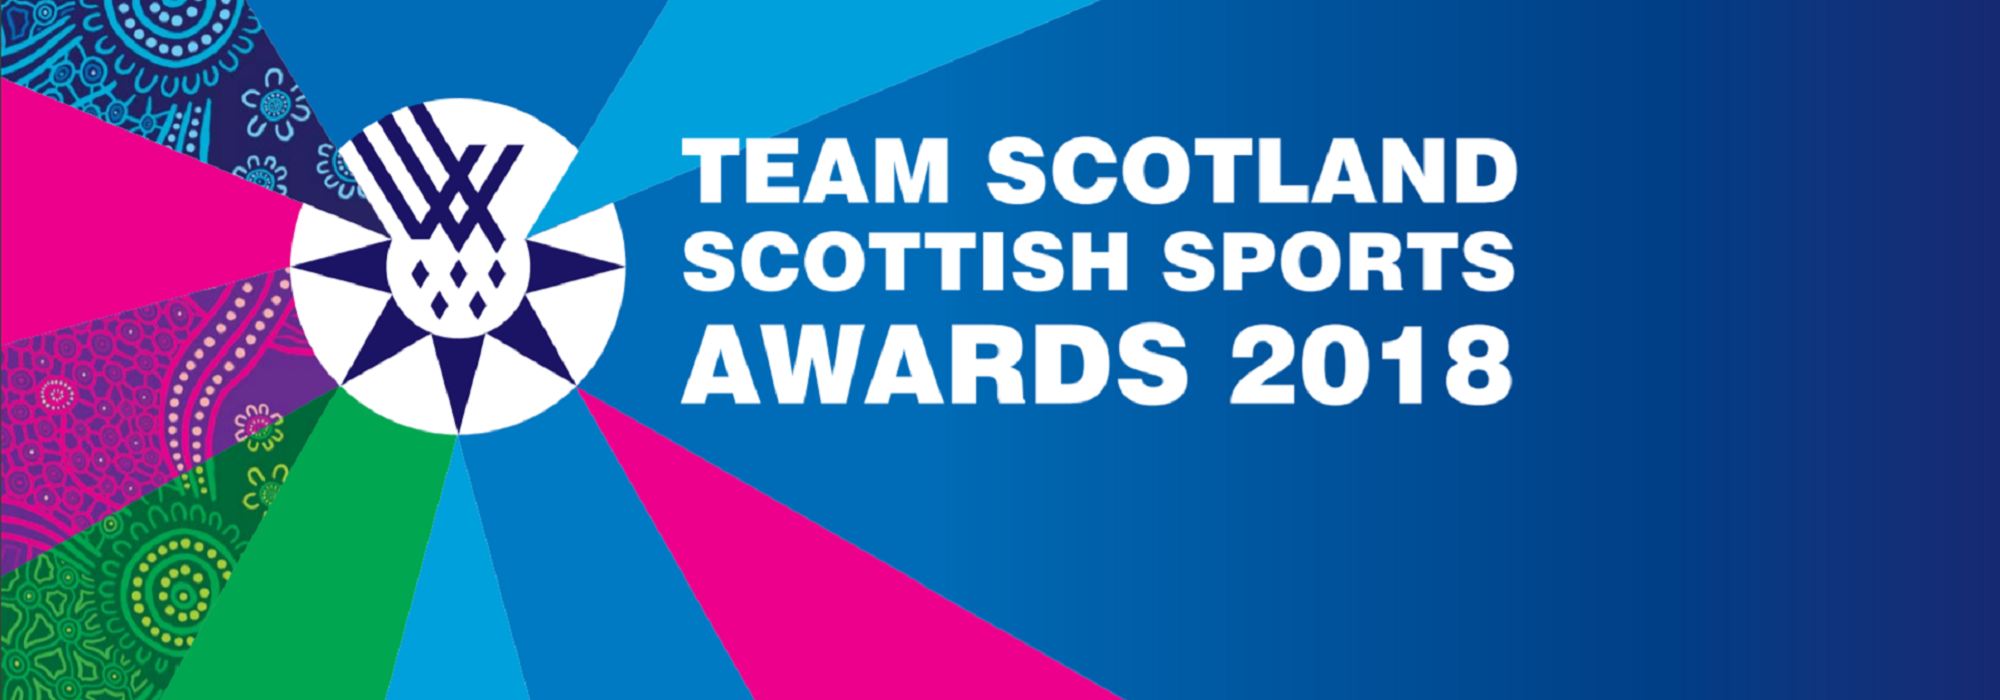 2018 Scottish Team Awards – Sporting Moment of the Year!